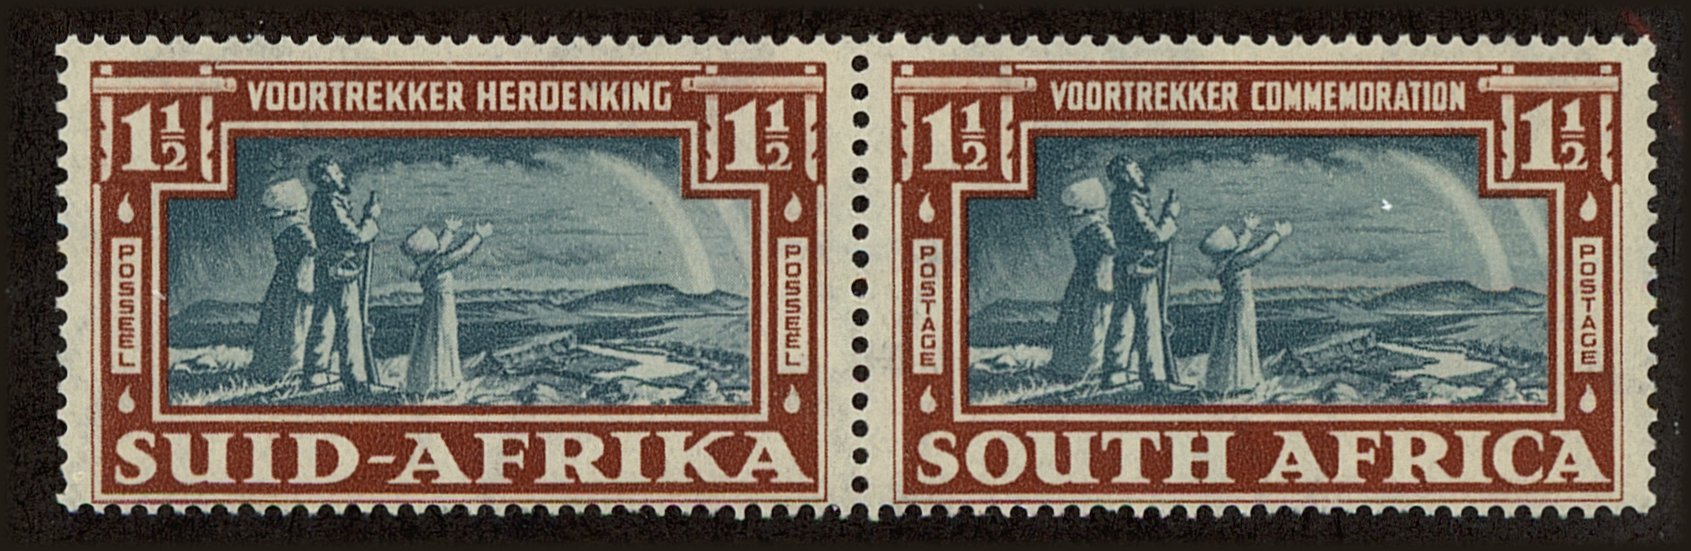 Front view of South Africa 80 collectors stamp